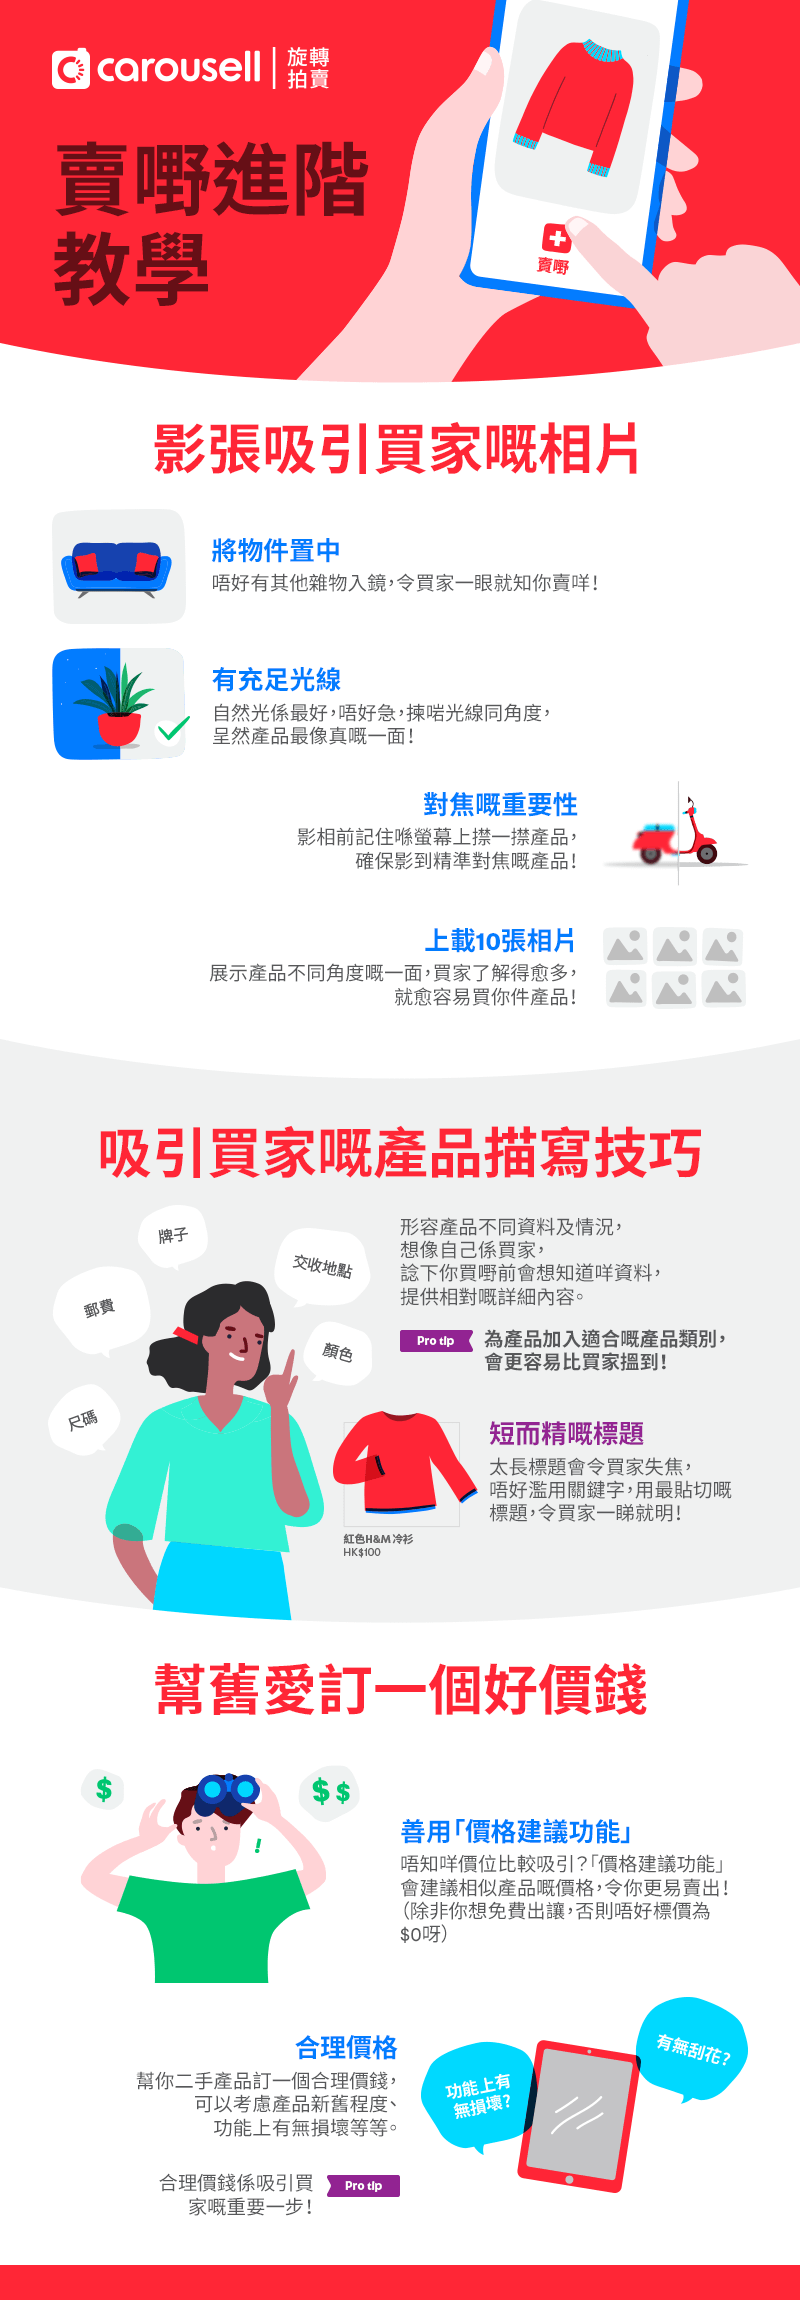 HelpCentre_SellingTips_Infographic-HK.png